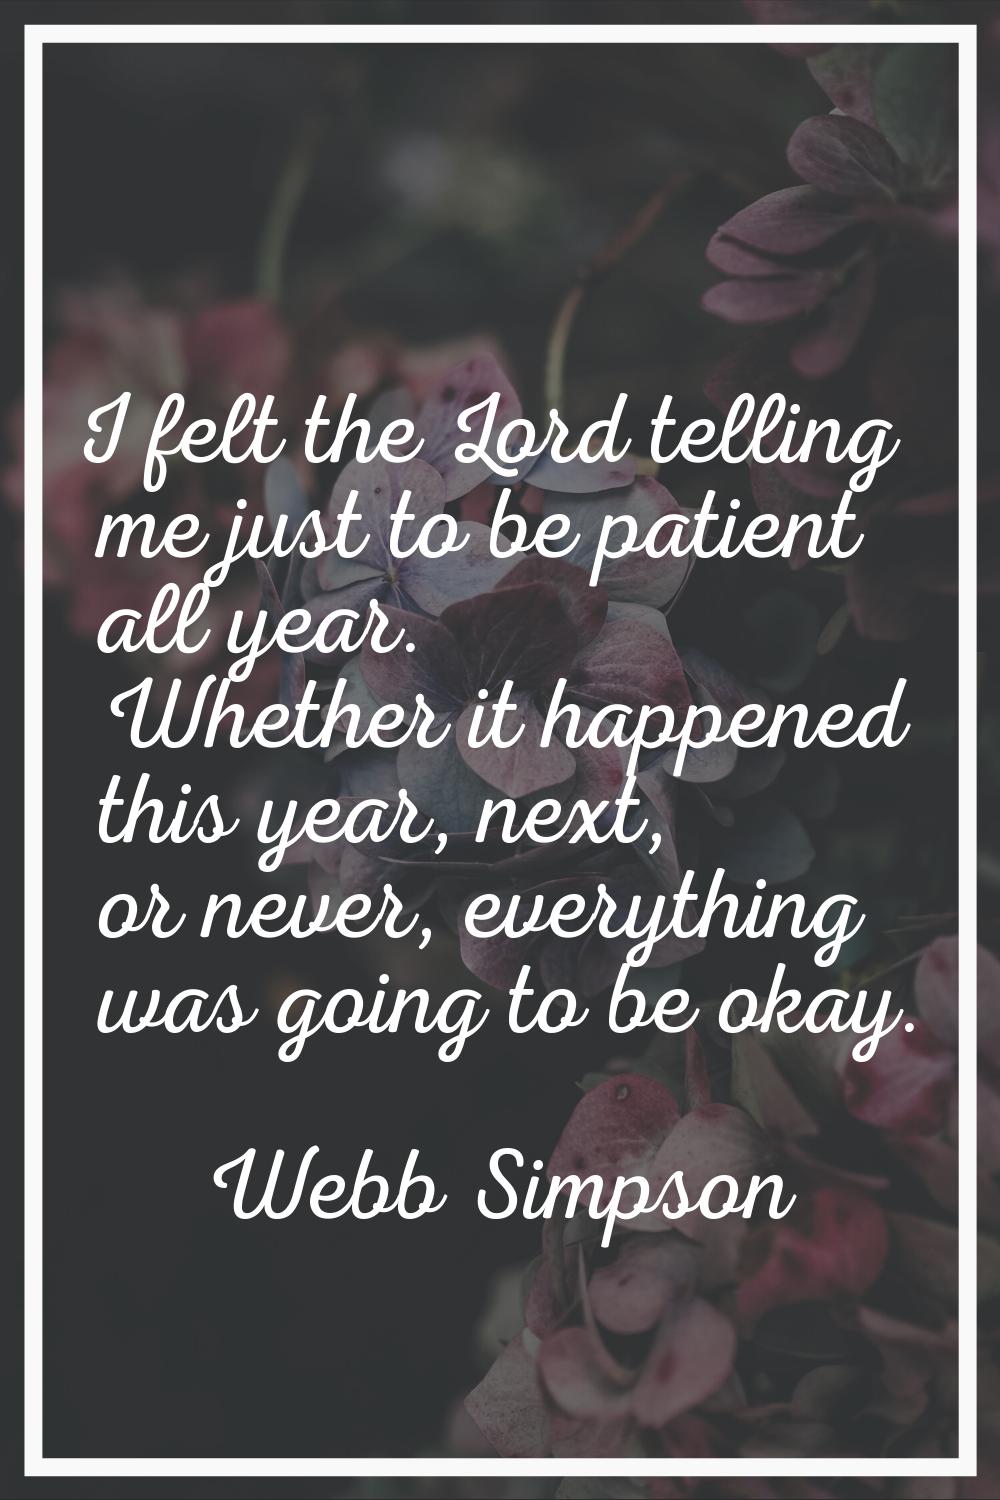 I felt the Lord telling me just to be patient all year. Whether it happened this year, next, or nev